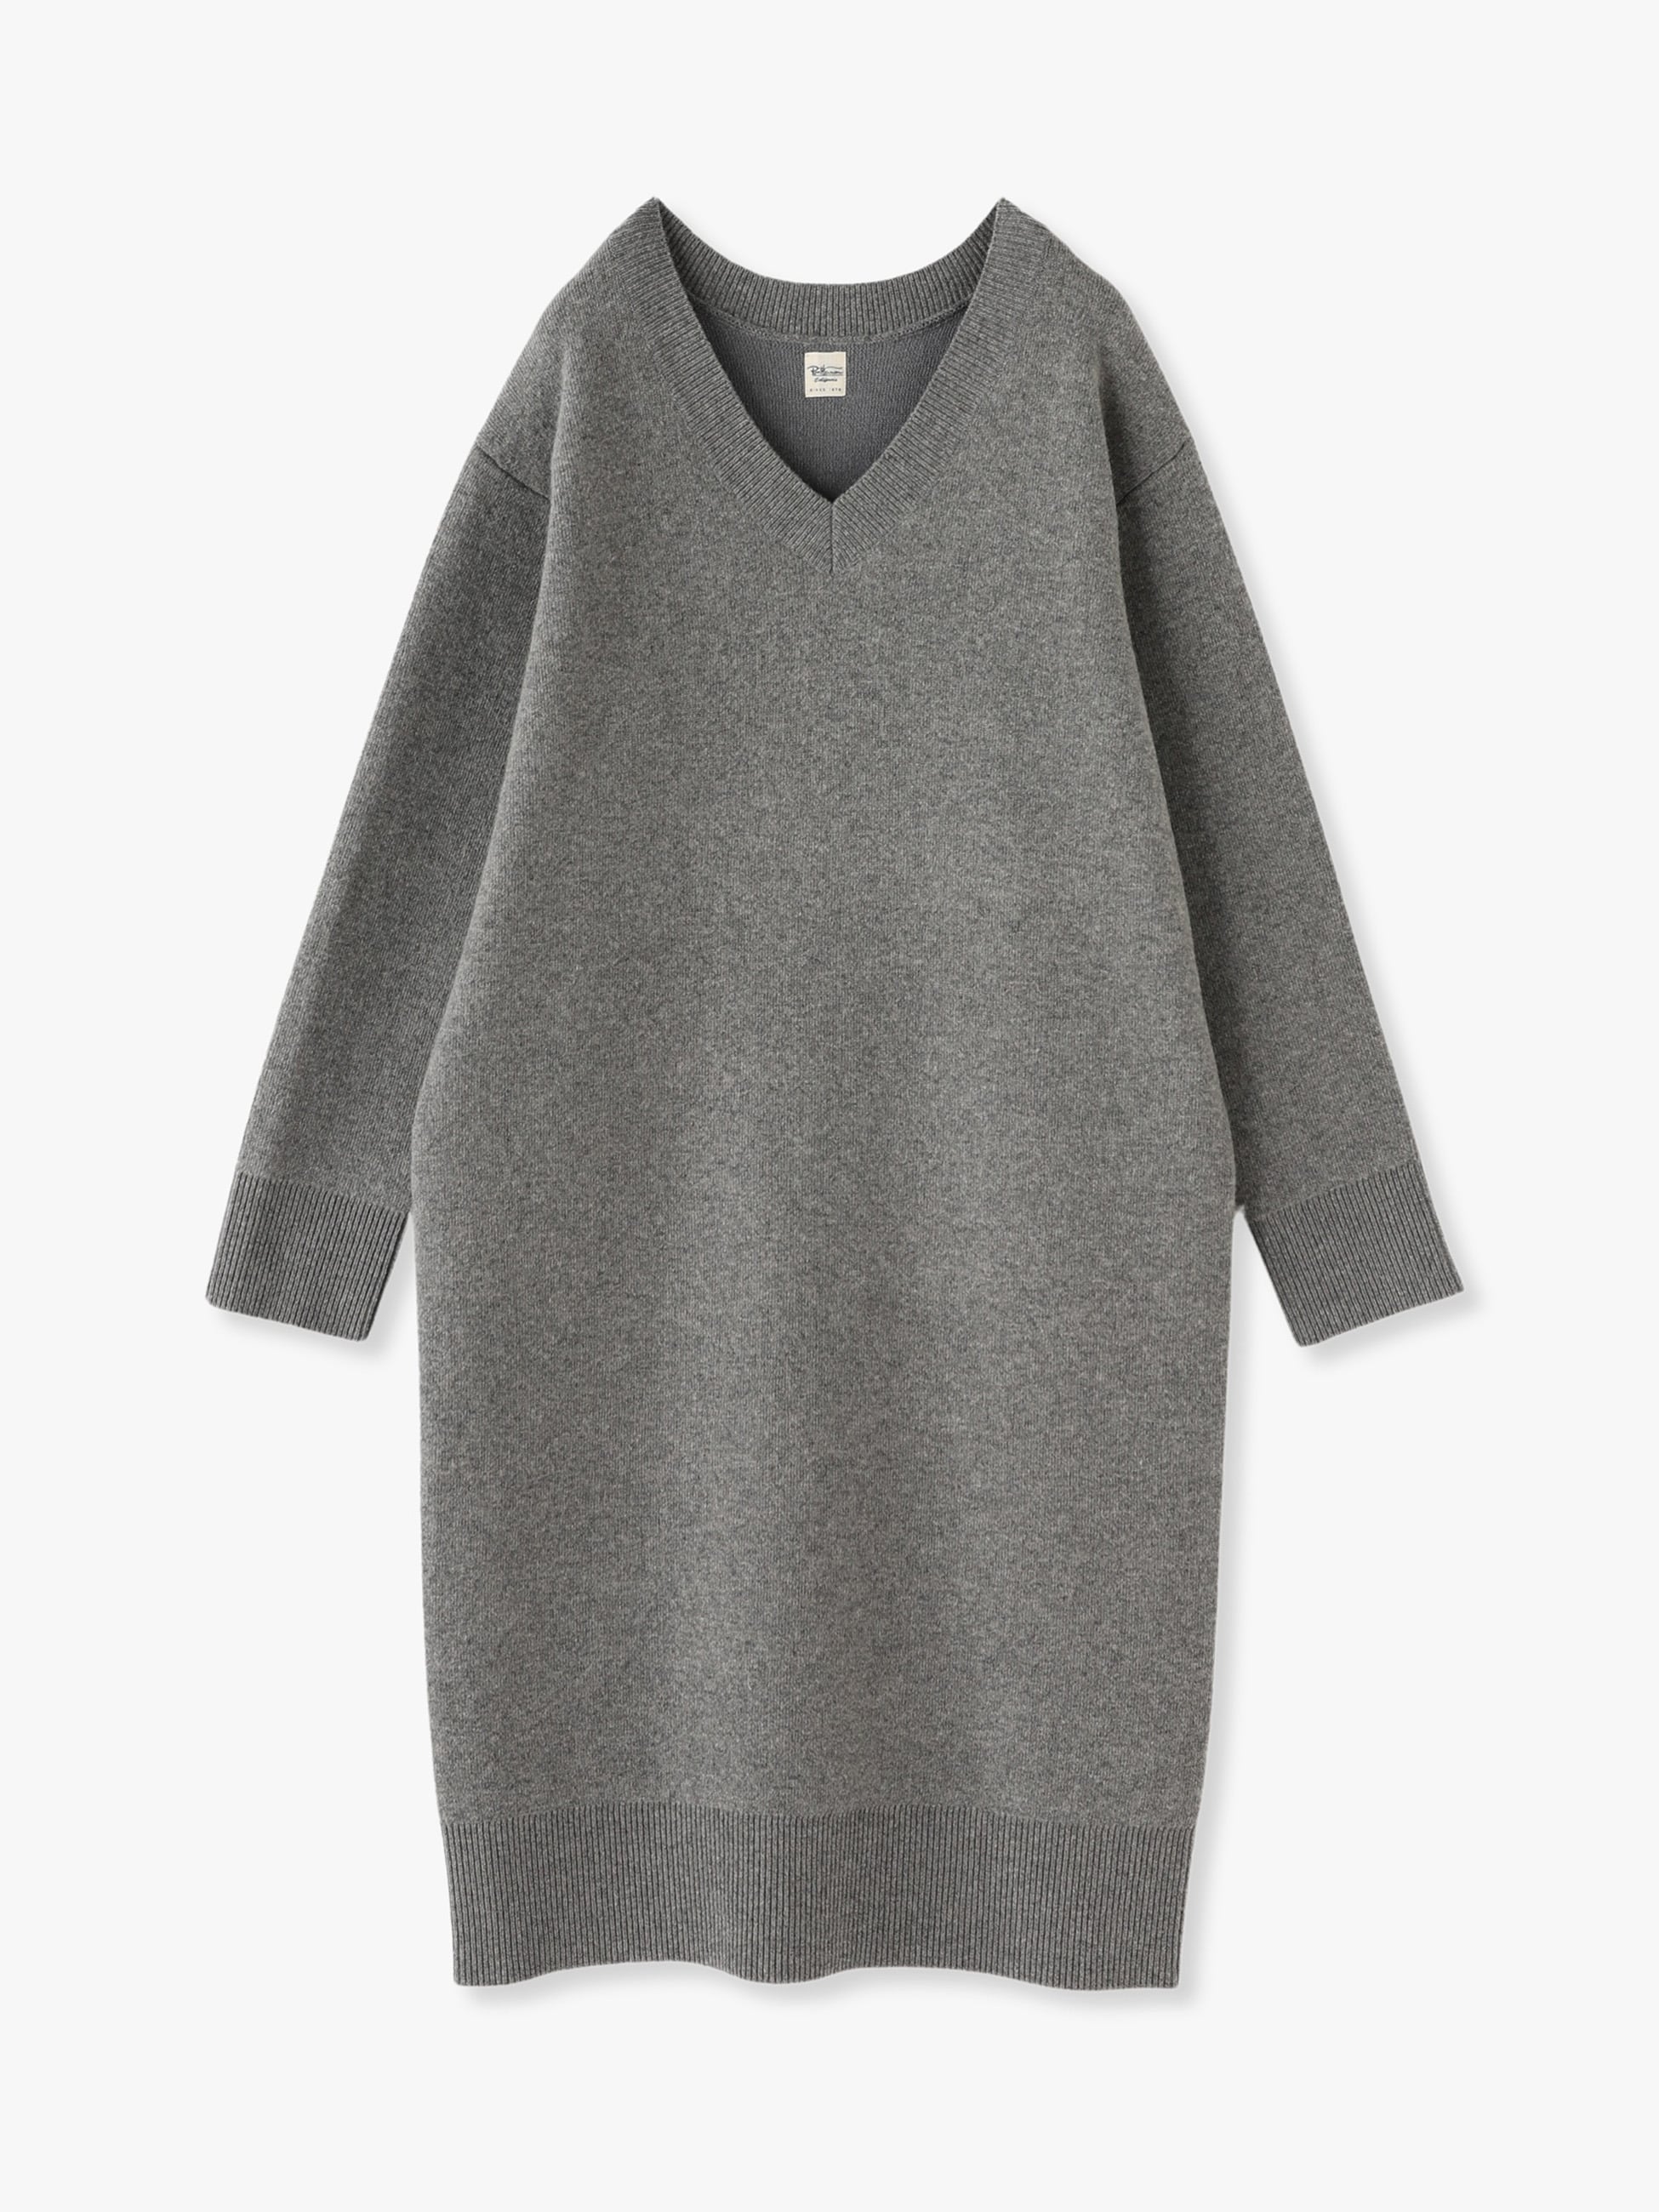 Ron Herman ロンハーマンDouble faced knit dress - レディース